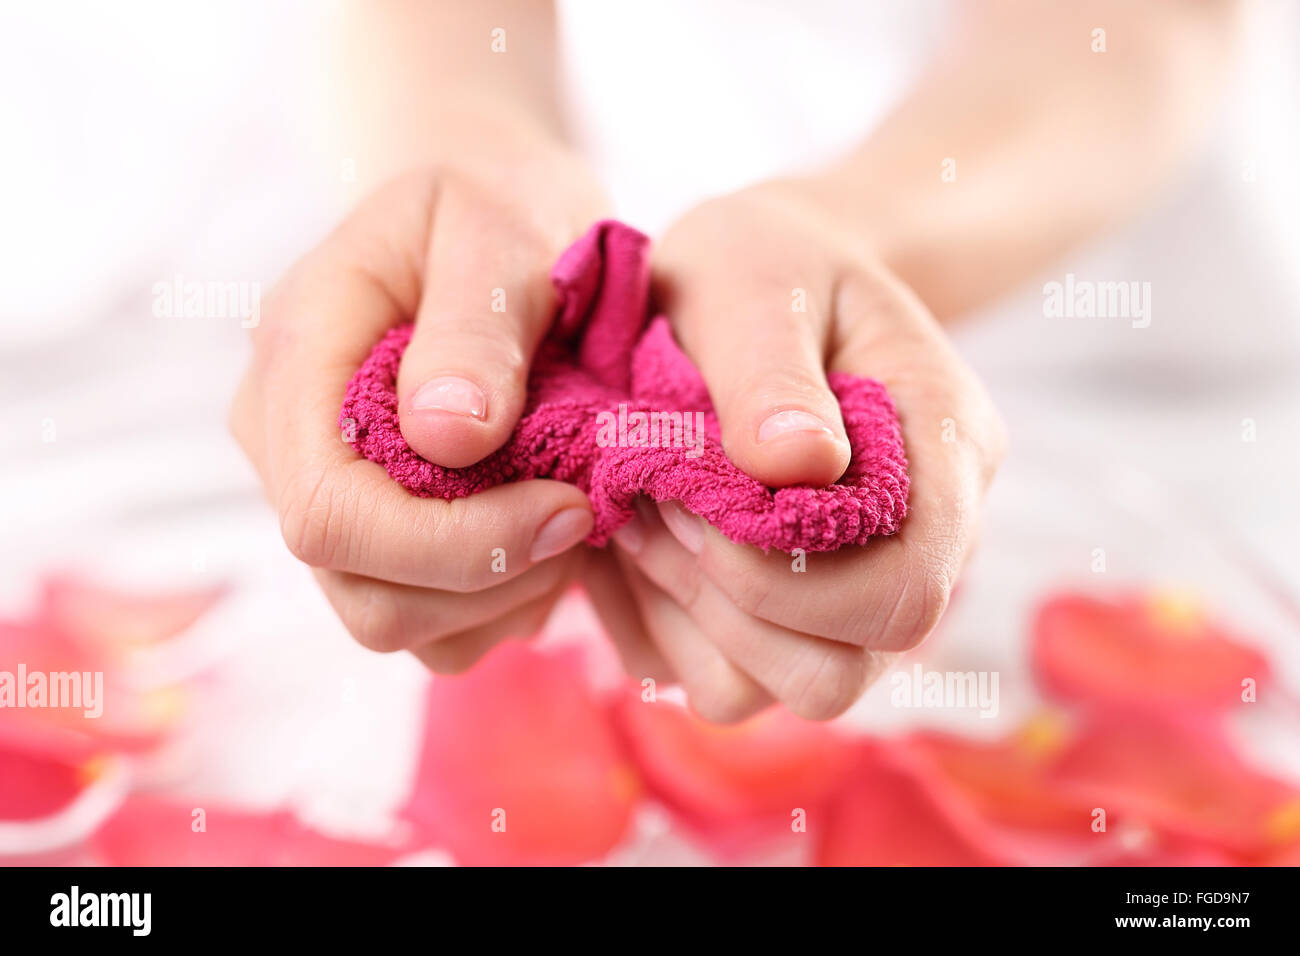 Care treatment of hands and nails woman hands over the bowl with rose petals. Hands women, rose bath nursing Stock Photo